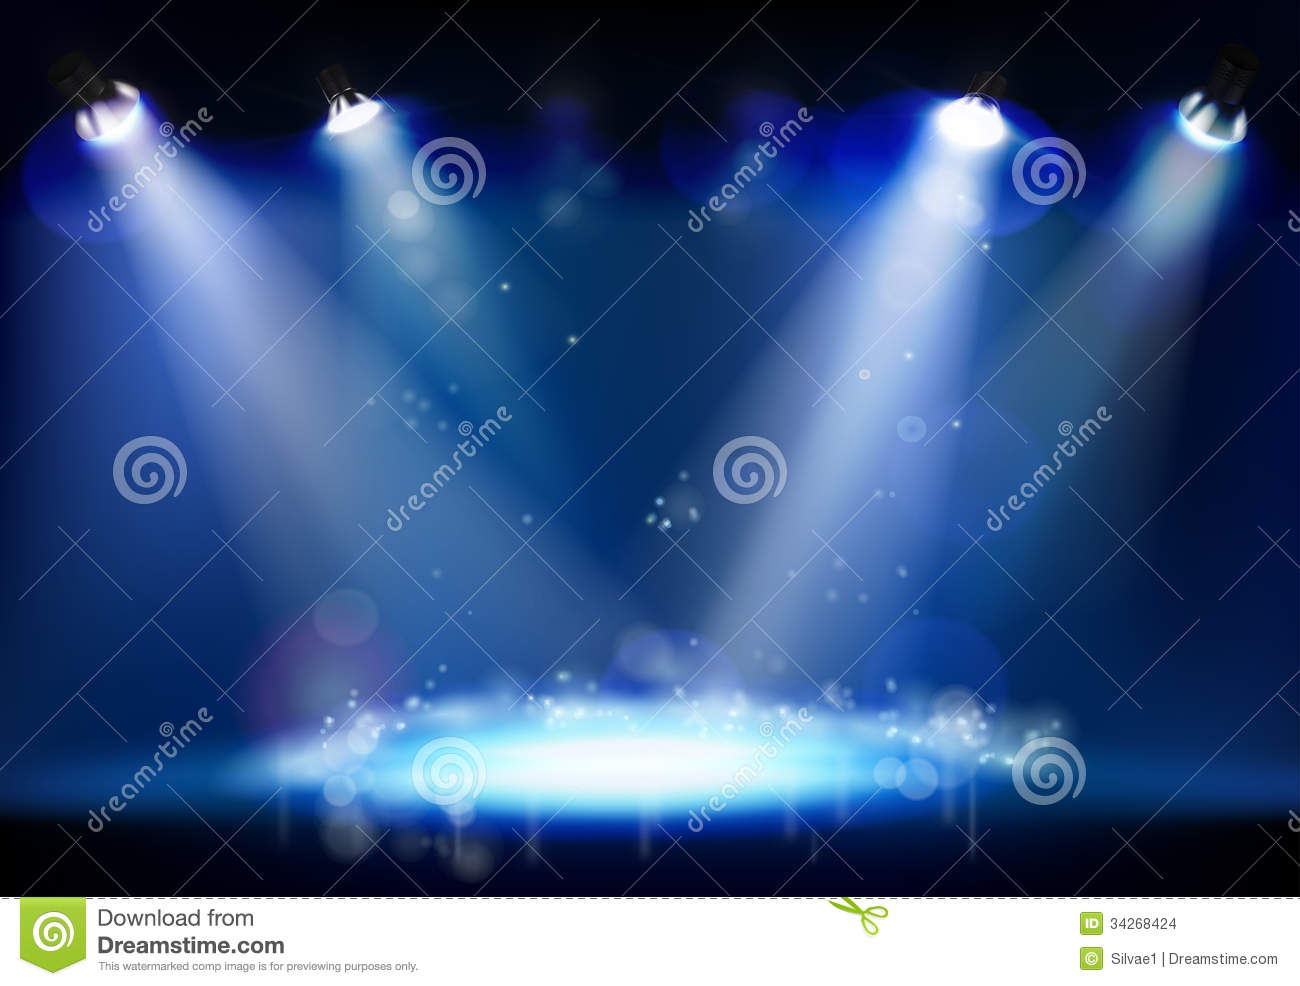 Stock Images  Night Performance  Vector Illustration